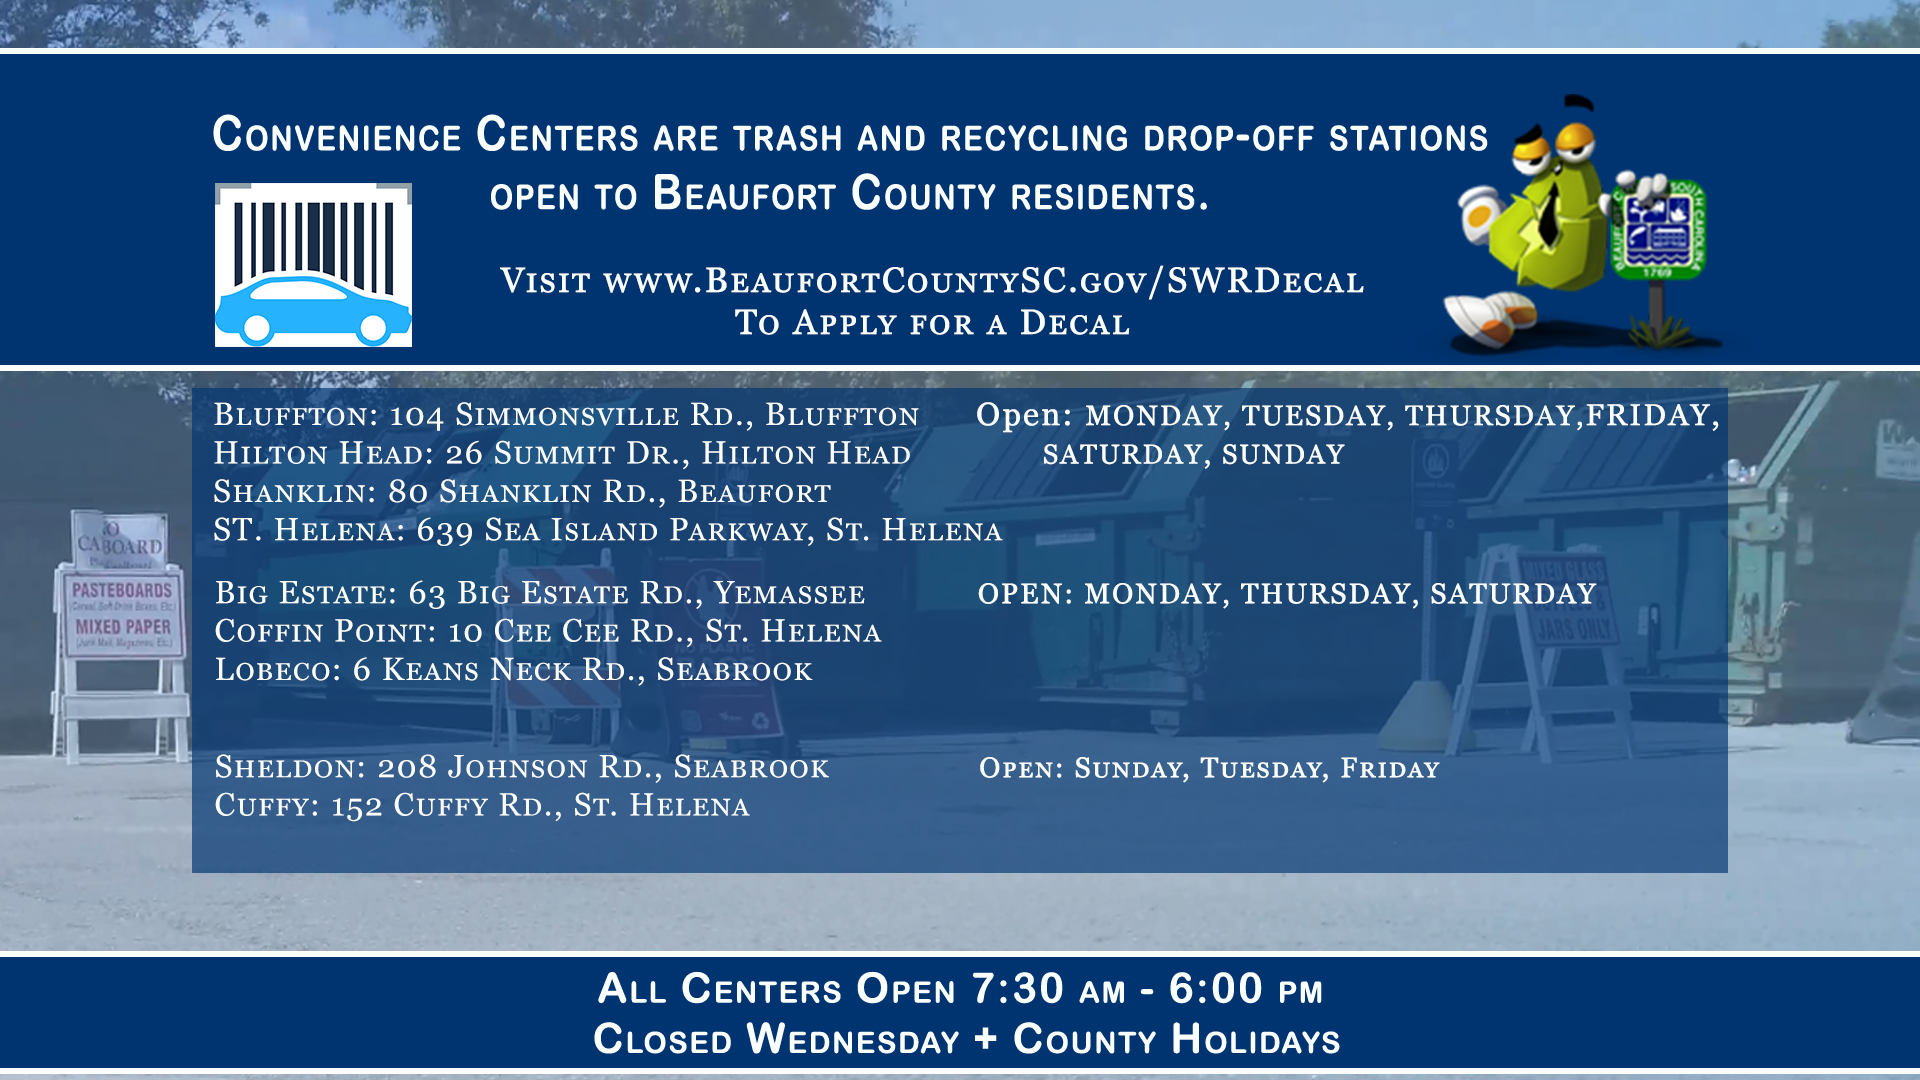 Beaufort County Convenience Center Decal Program Saves Residents $290,000; Full Implementation Begins Monday, November 1